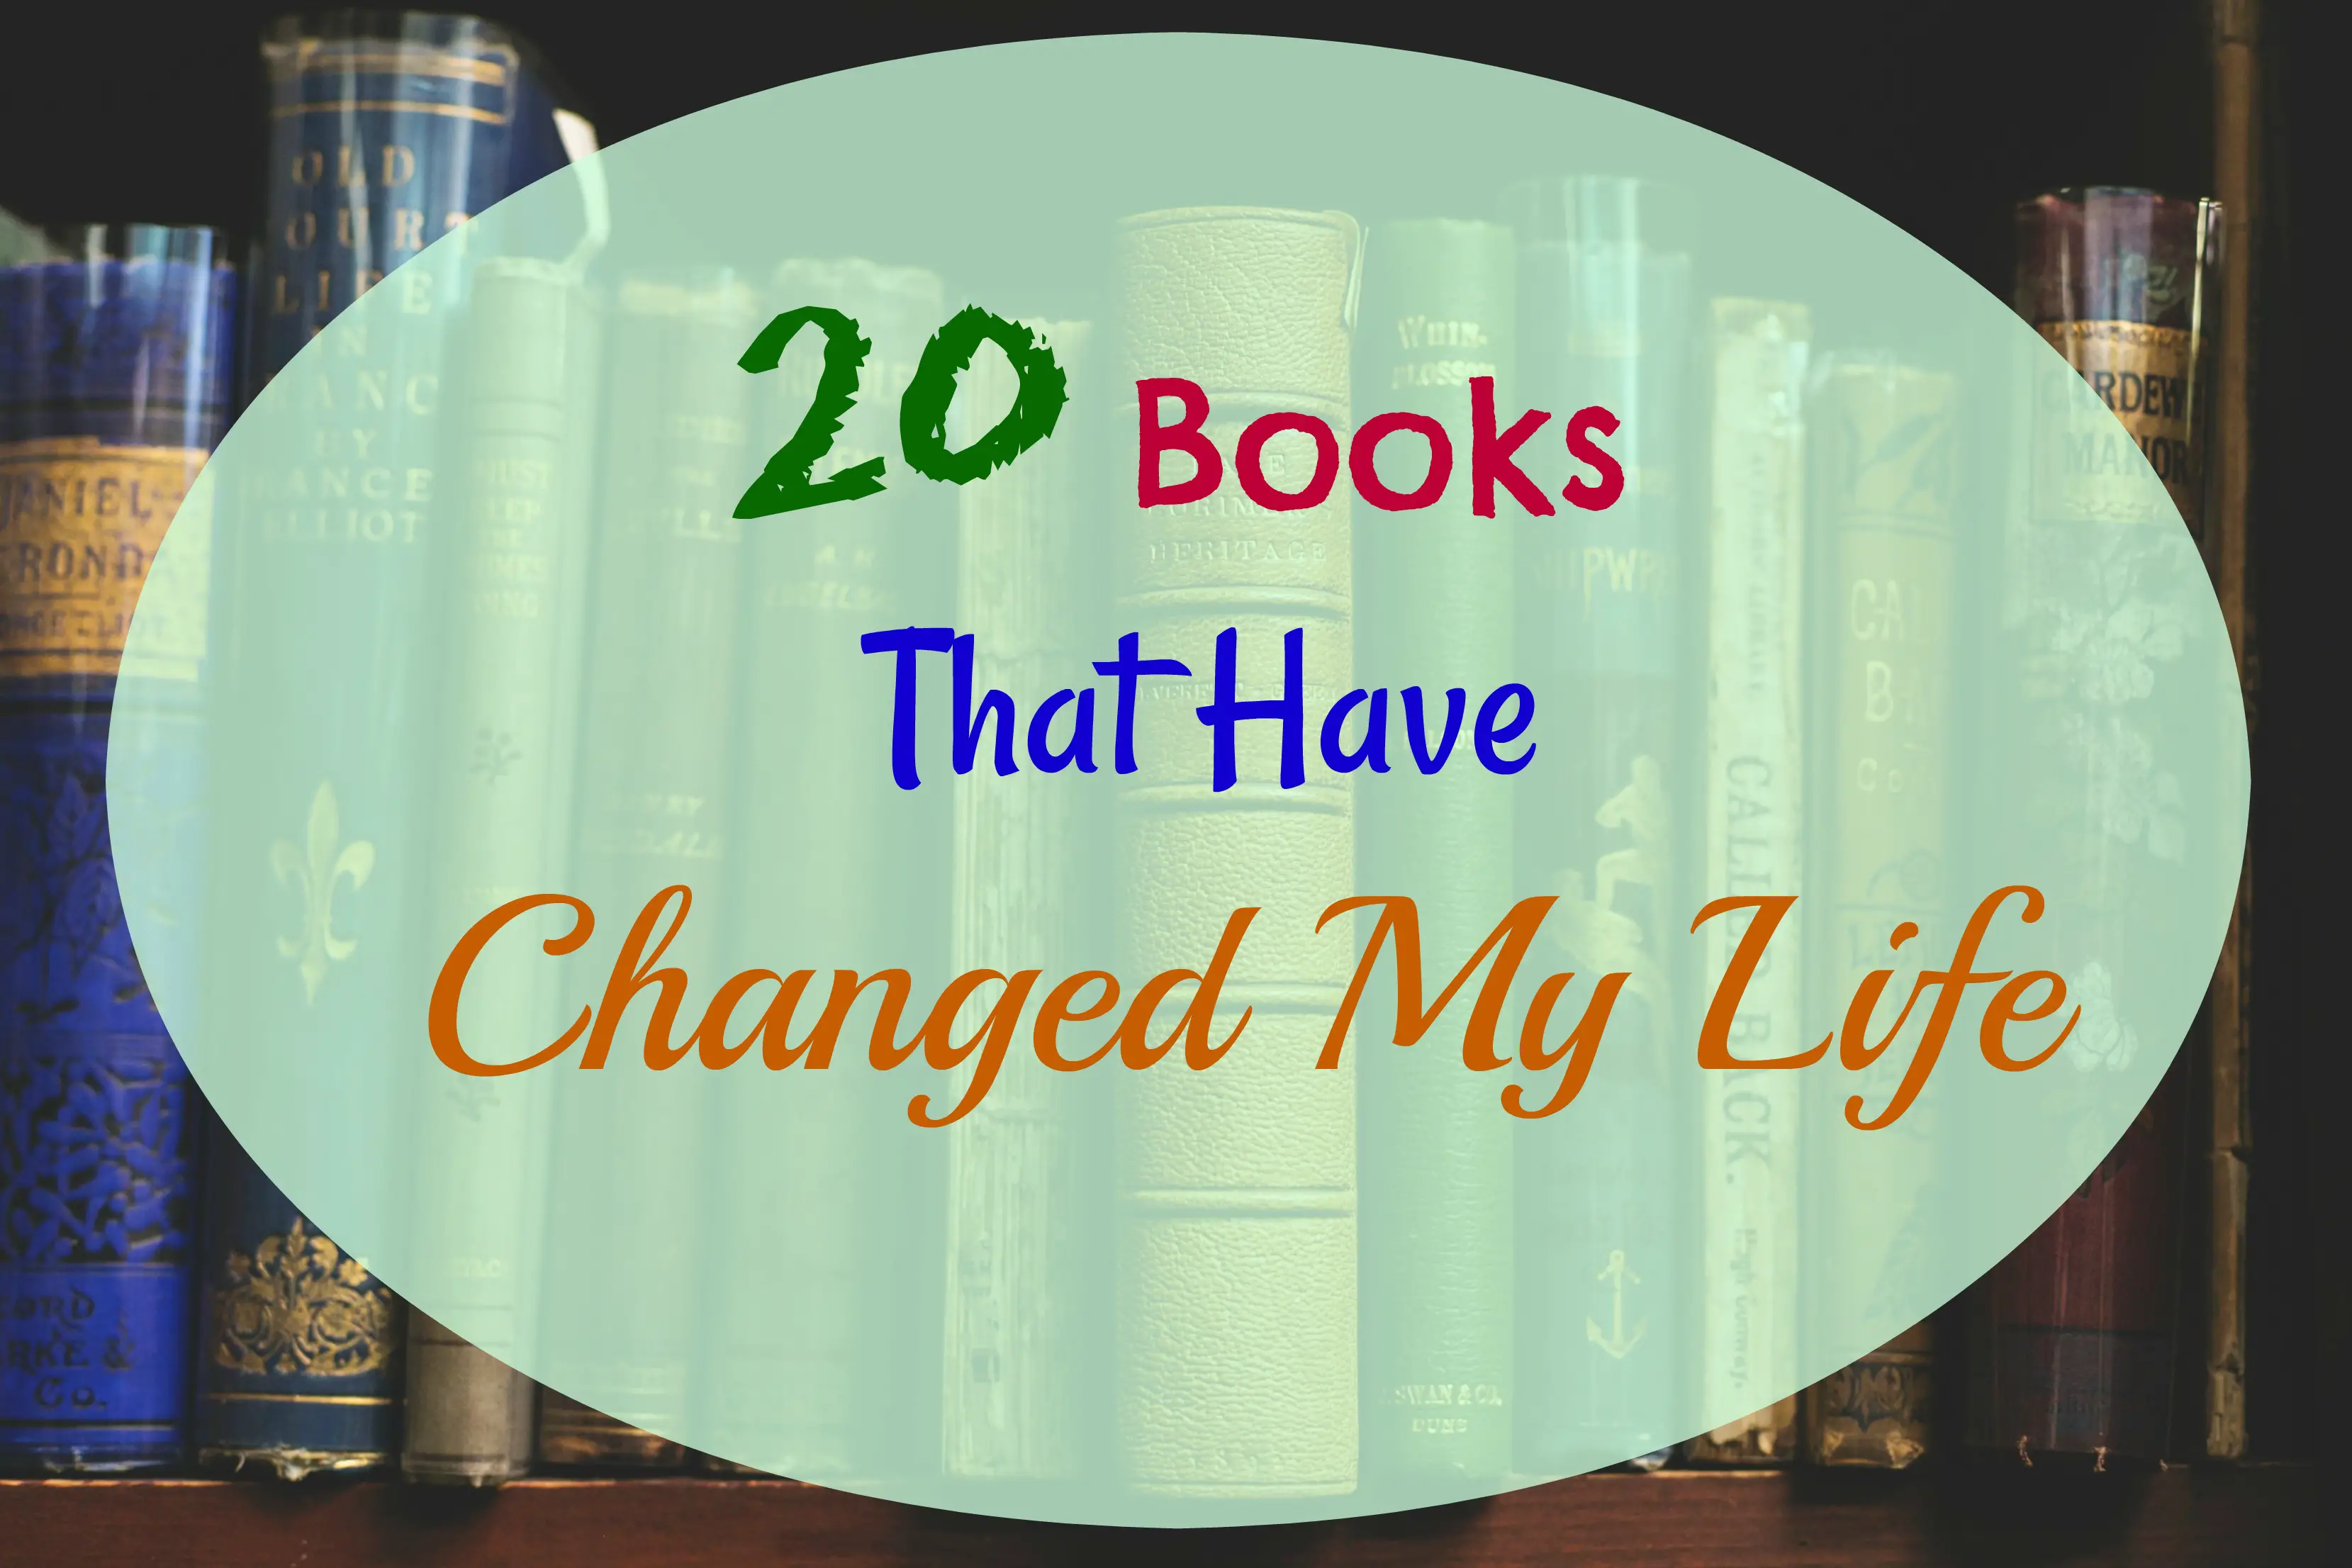 20 Books that have changed my life